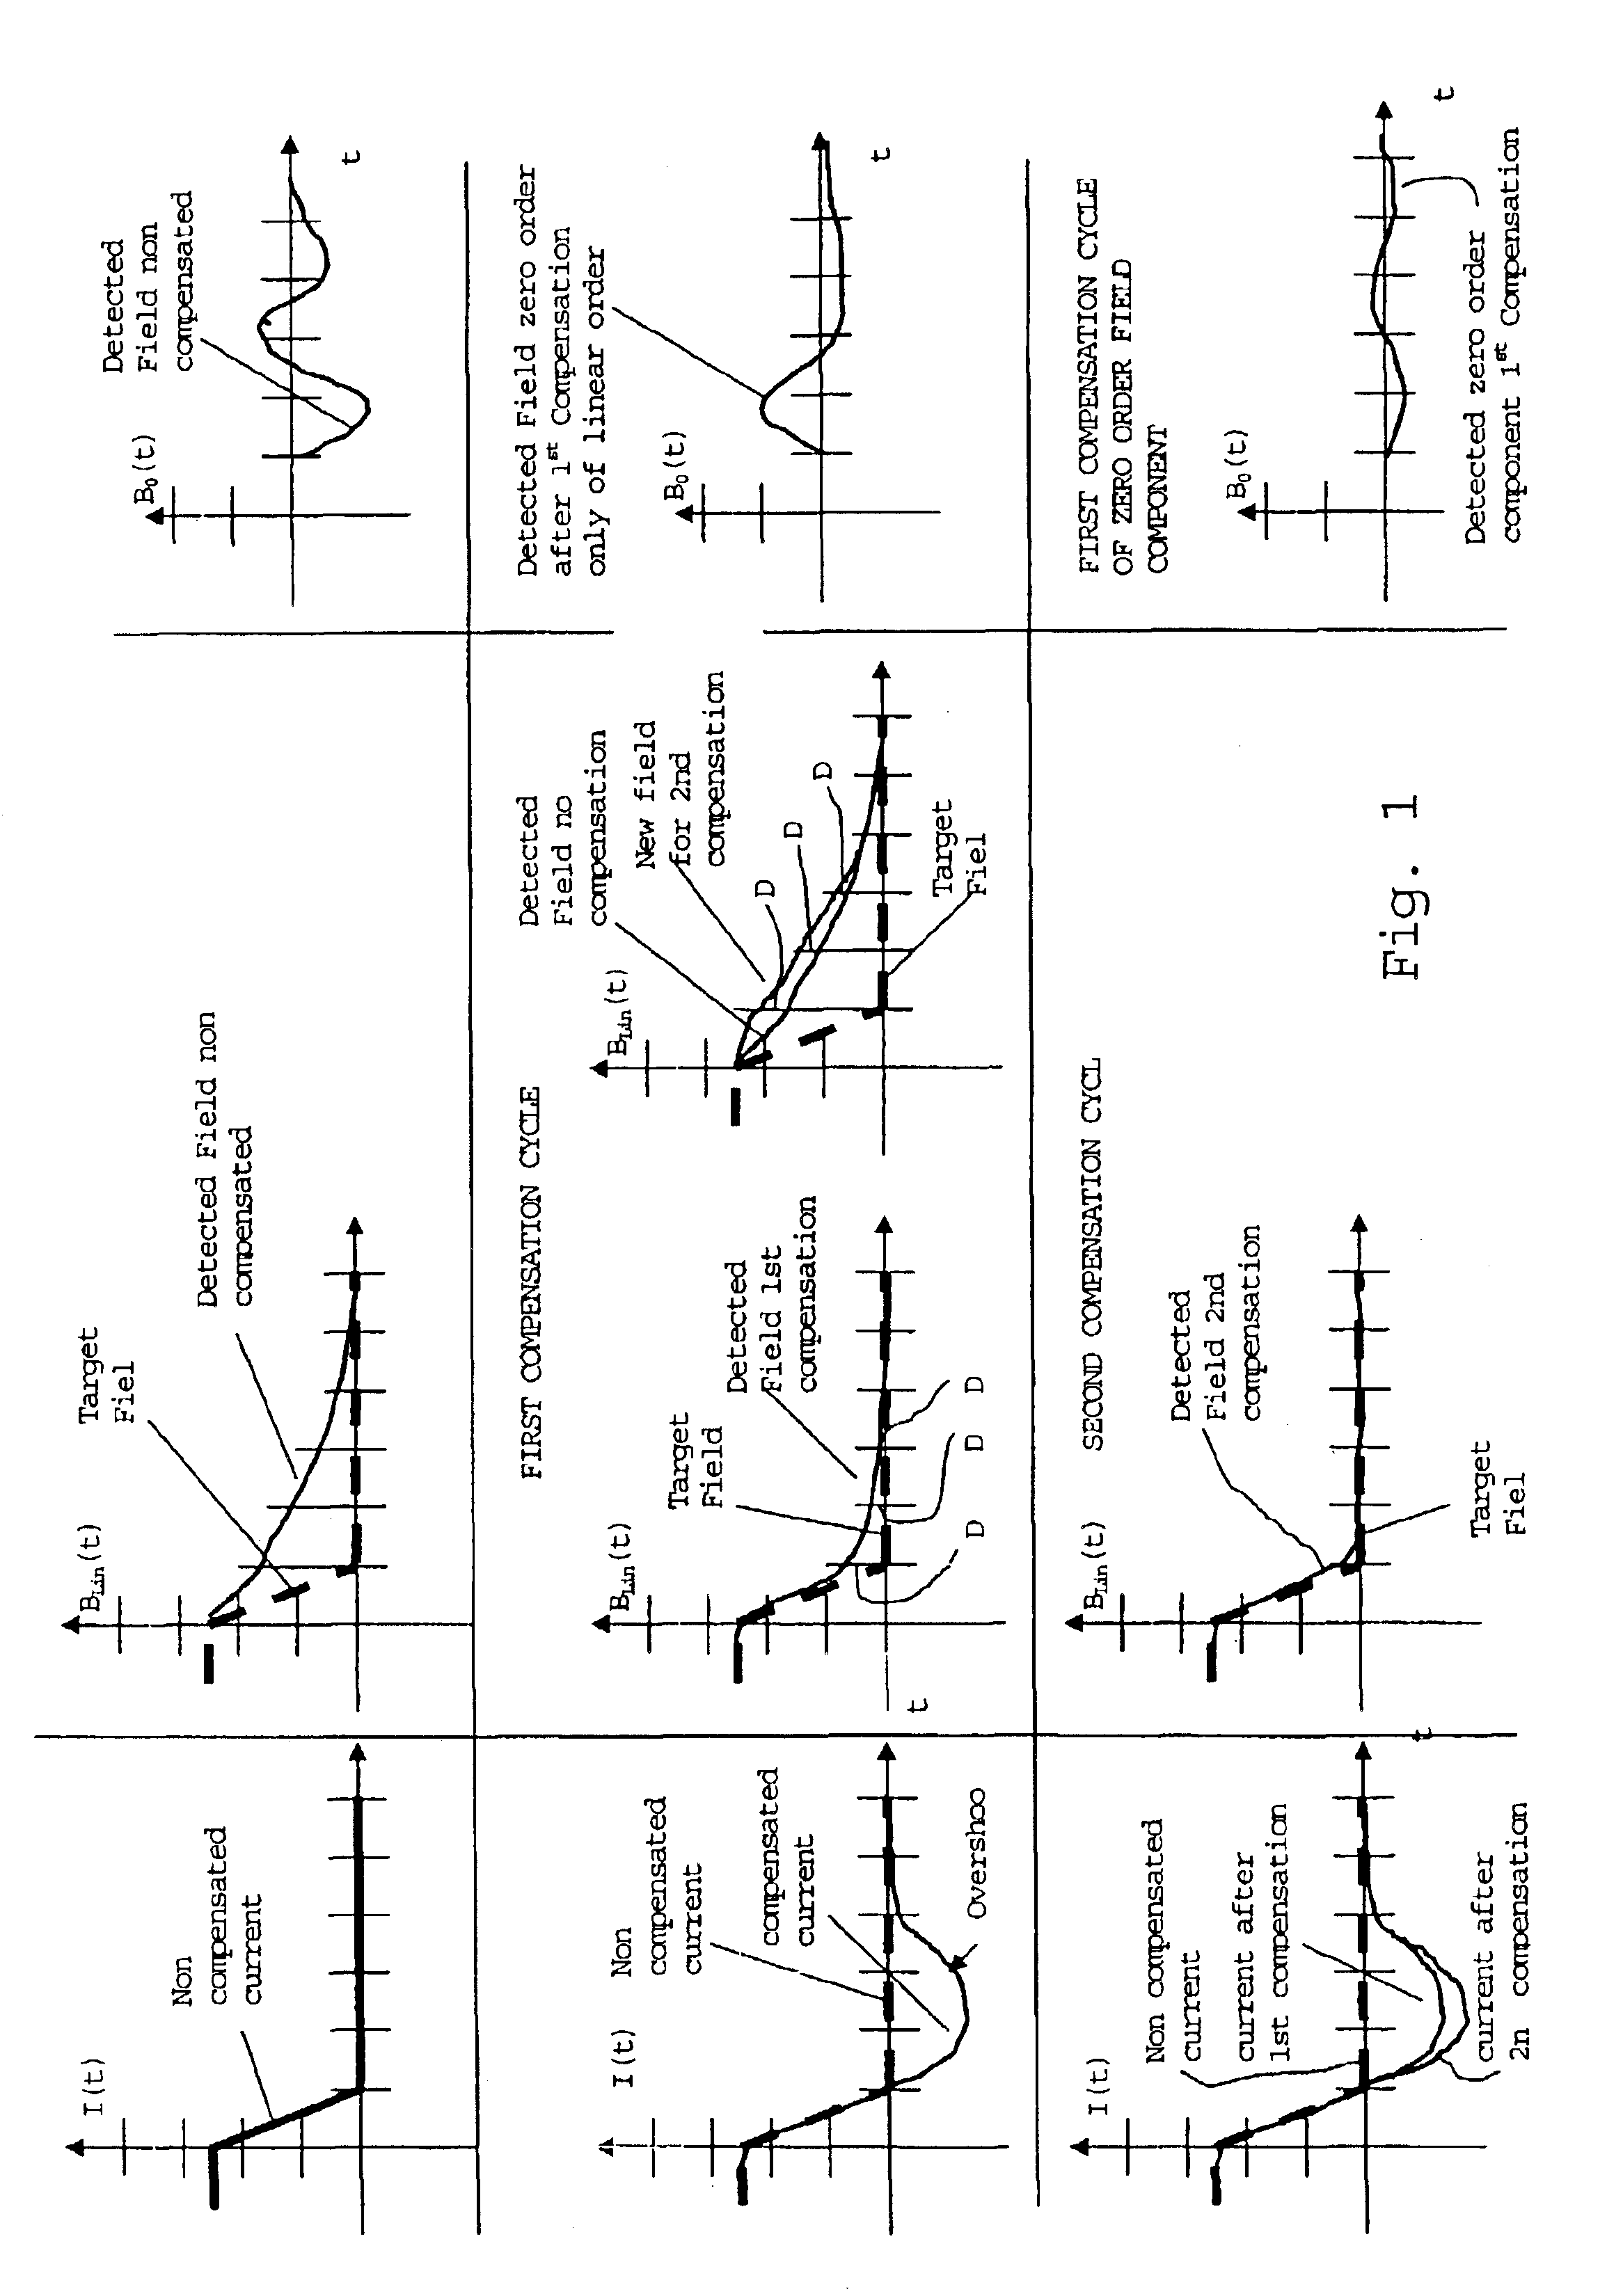 Method of compensating for gradient induced eddy currents in NMR imaging apparatuses